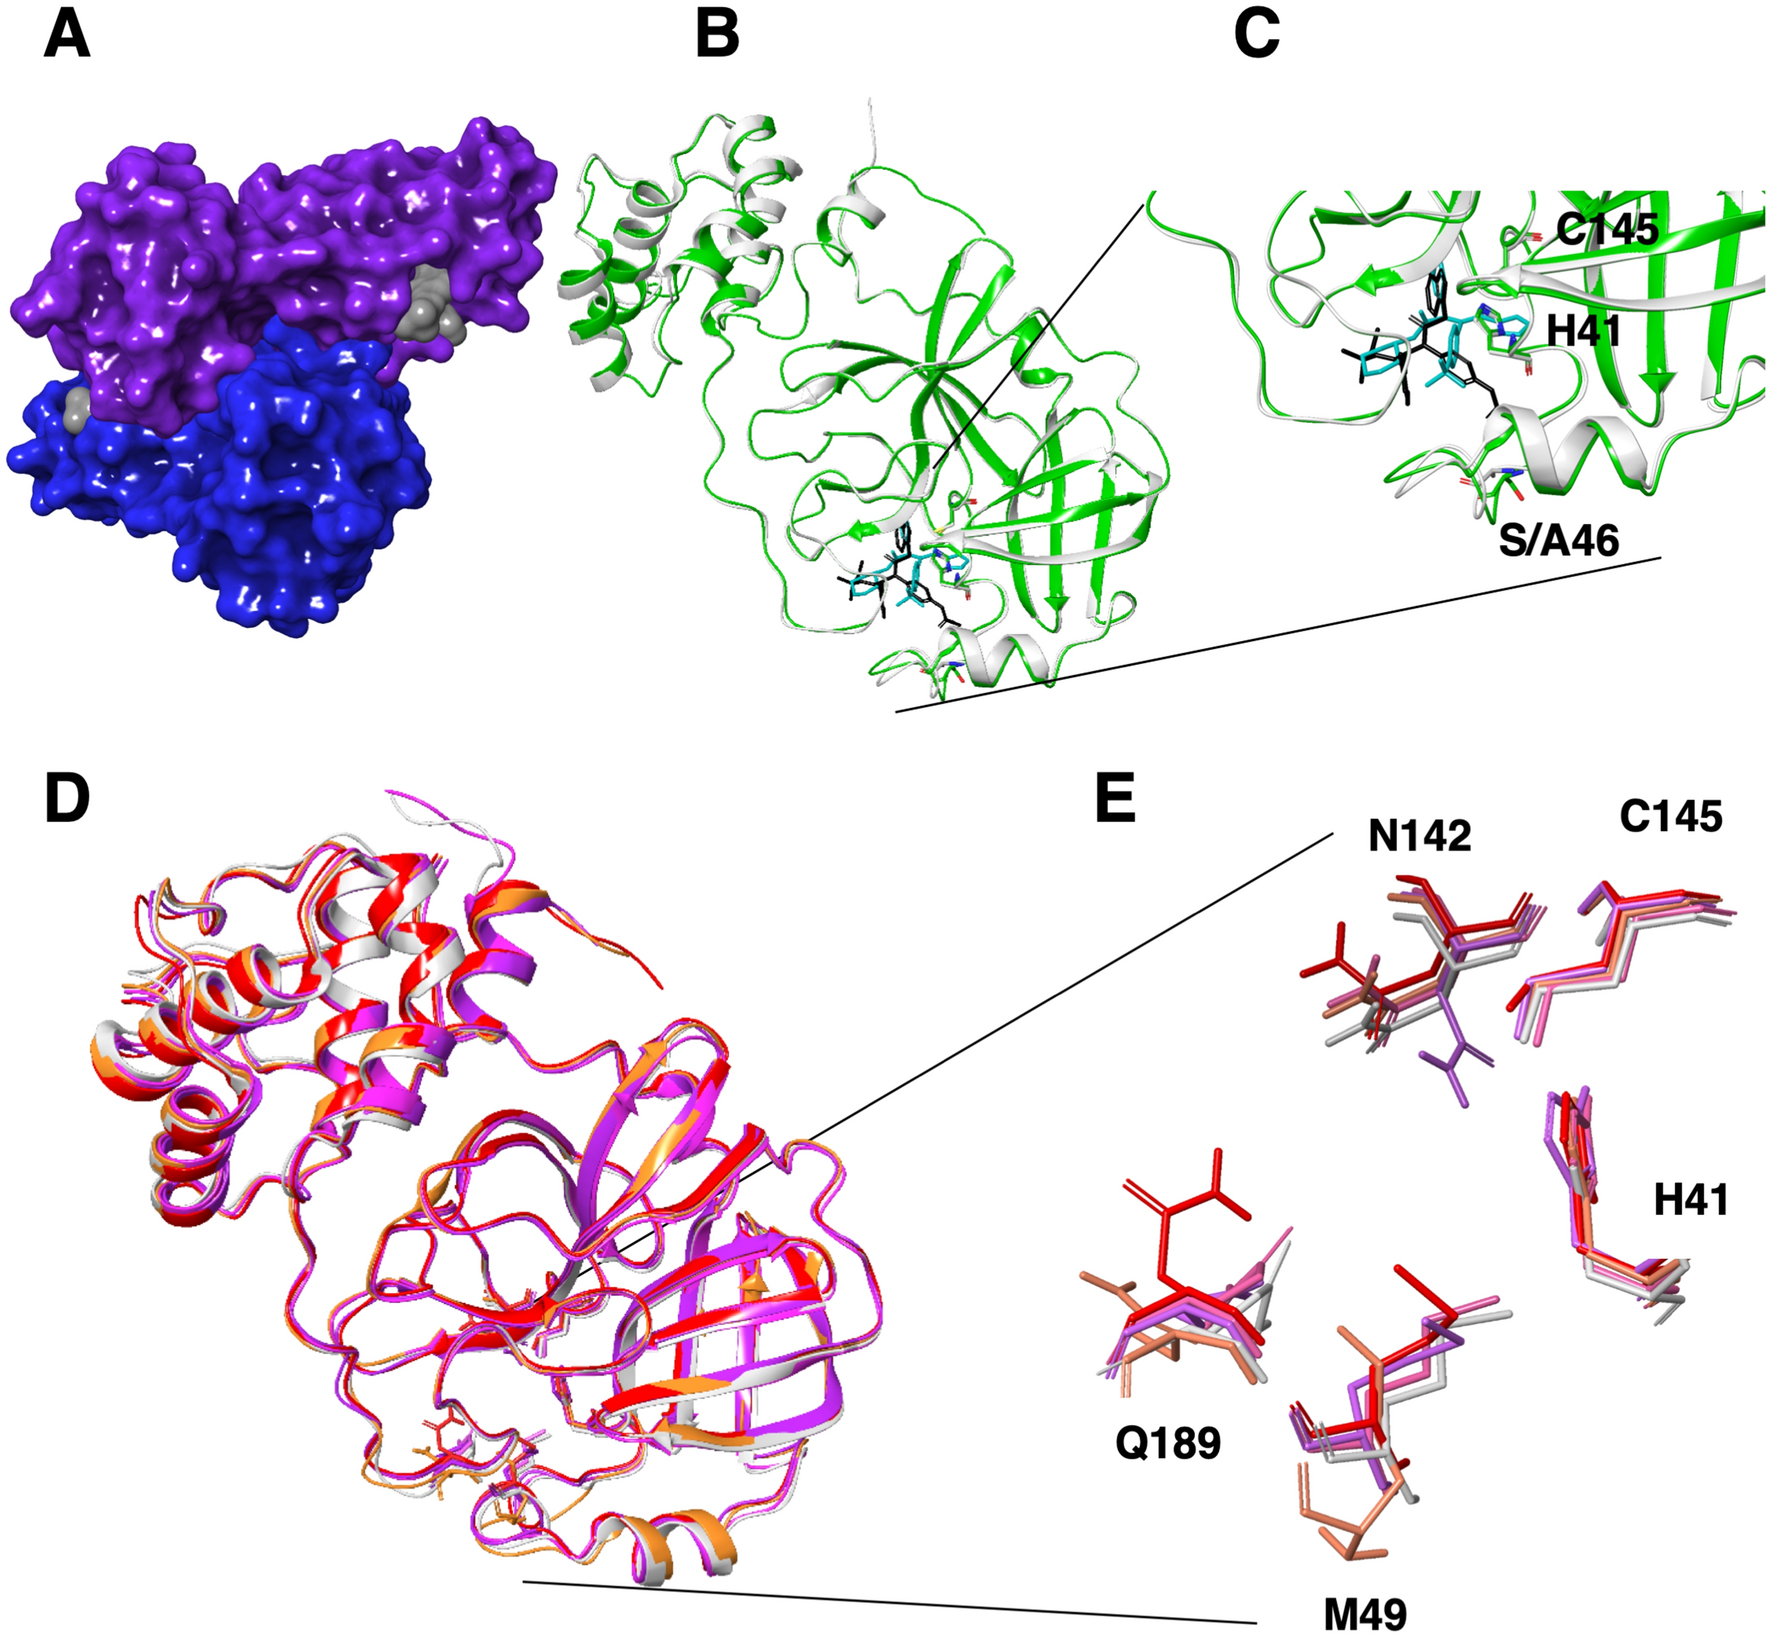 Potent Noncovalent Inhibitors of the Main Protease of SARS-CoV-2